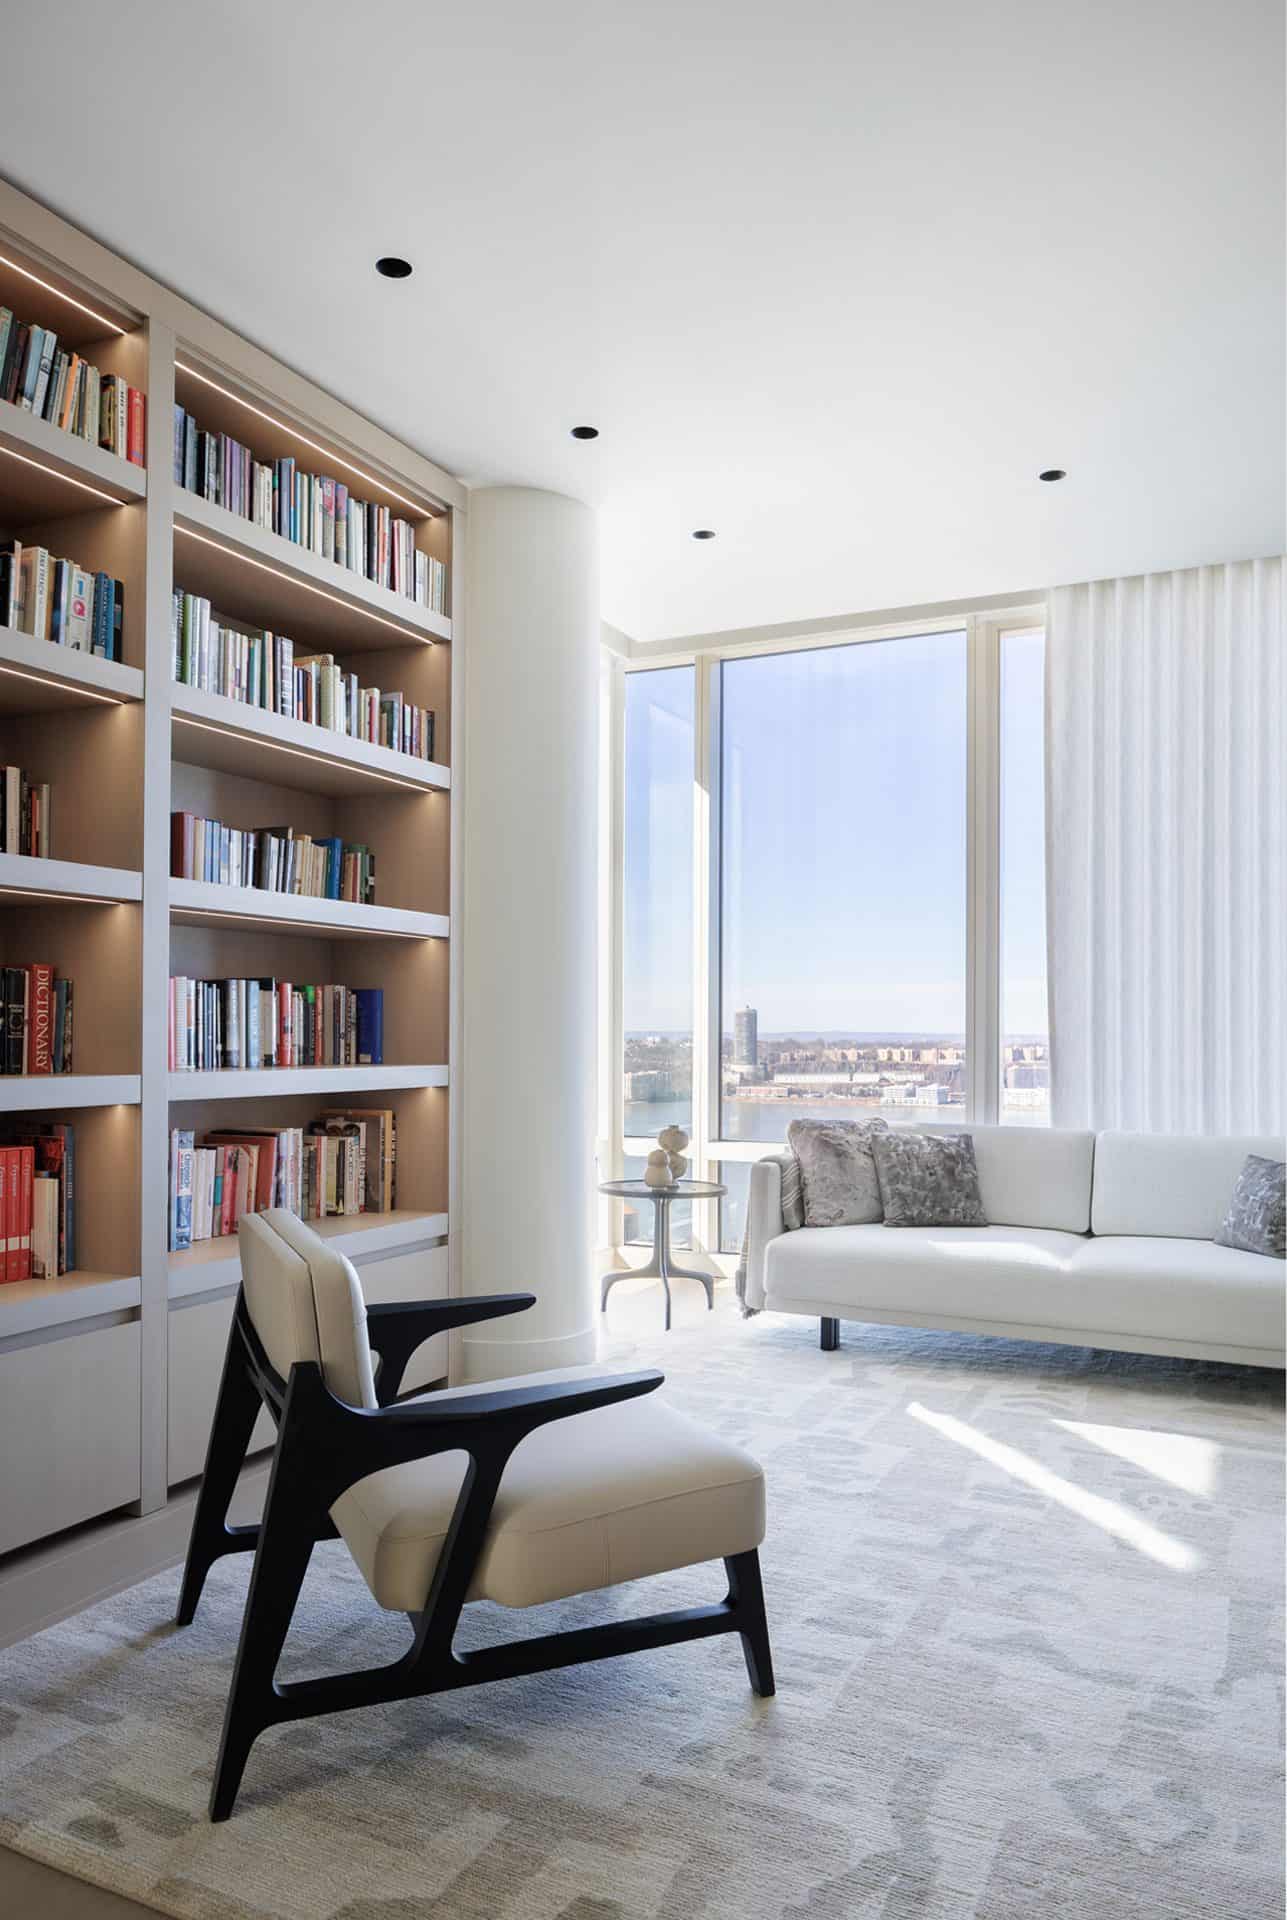 View of a study with a chair in front of book shelves Bilotta millwork, and a couch